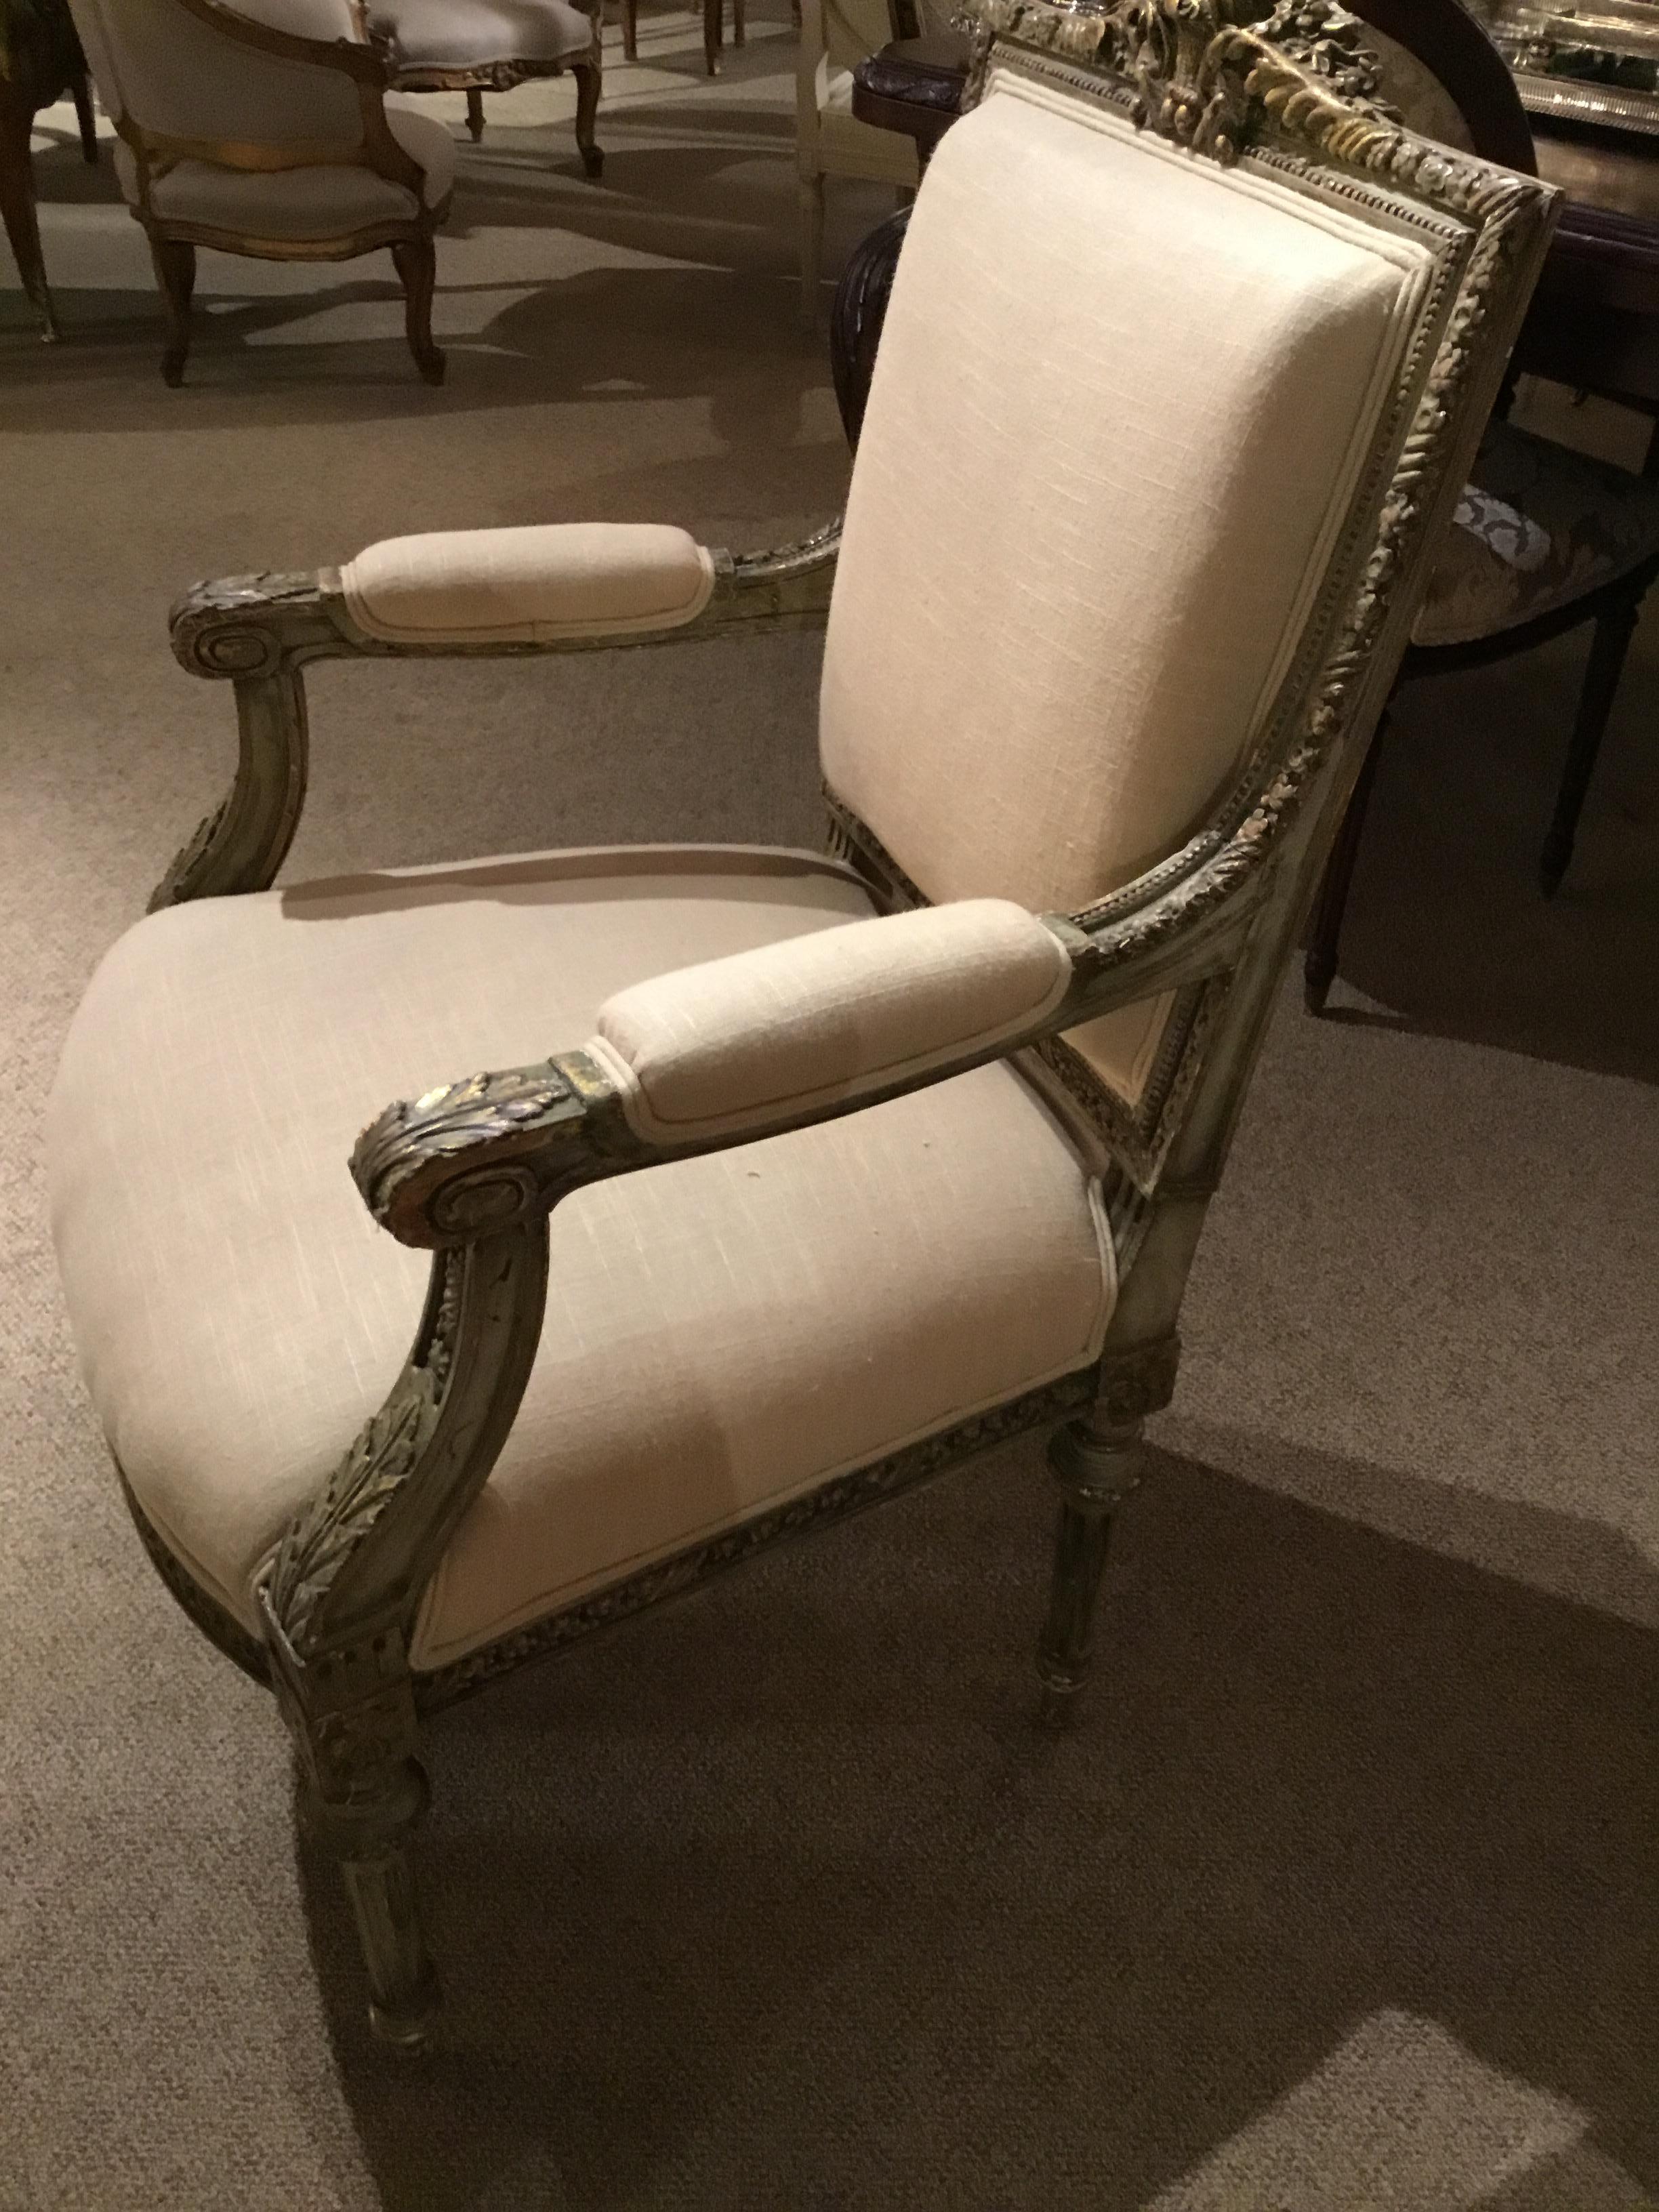 Beautifully carved French Louis XVI-style armchair painted in original French green hue, 19th century
With gilt highlights, having a reeded carved leg. New upholstery in cream linen.